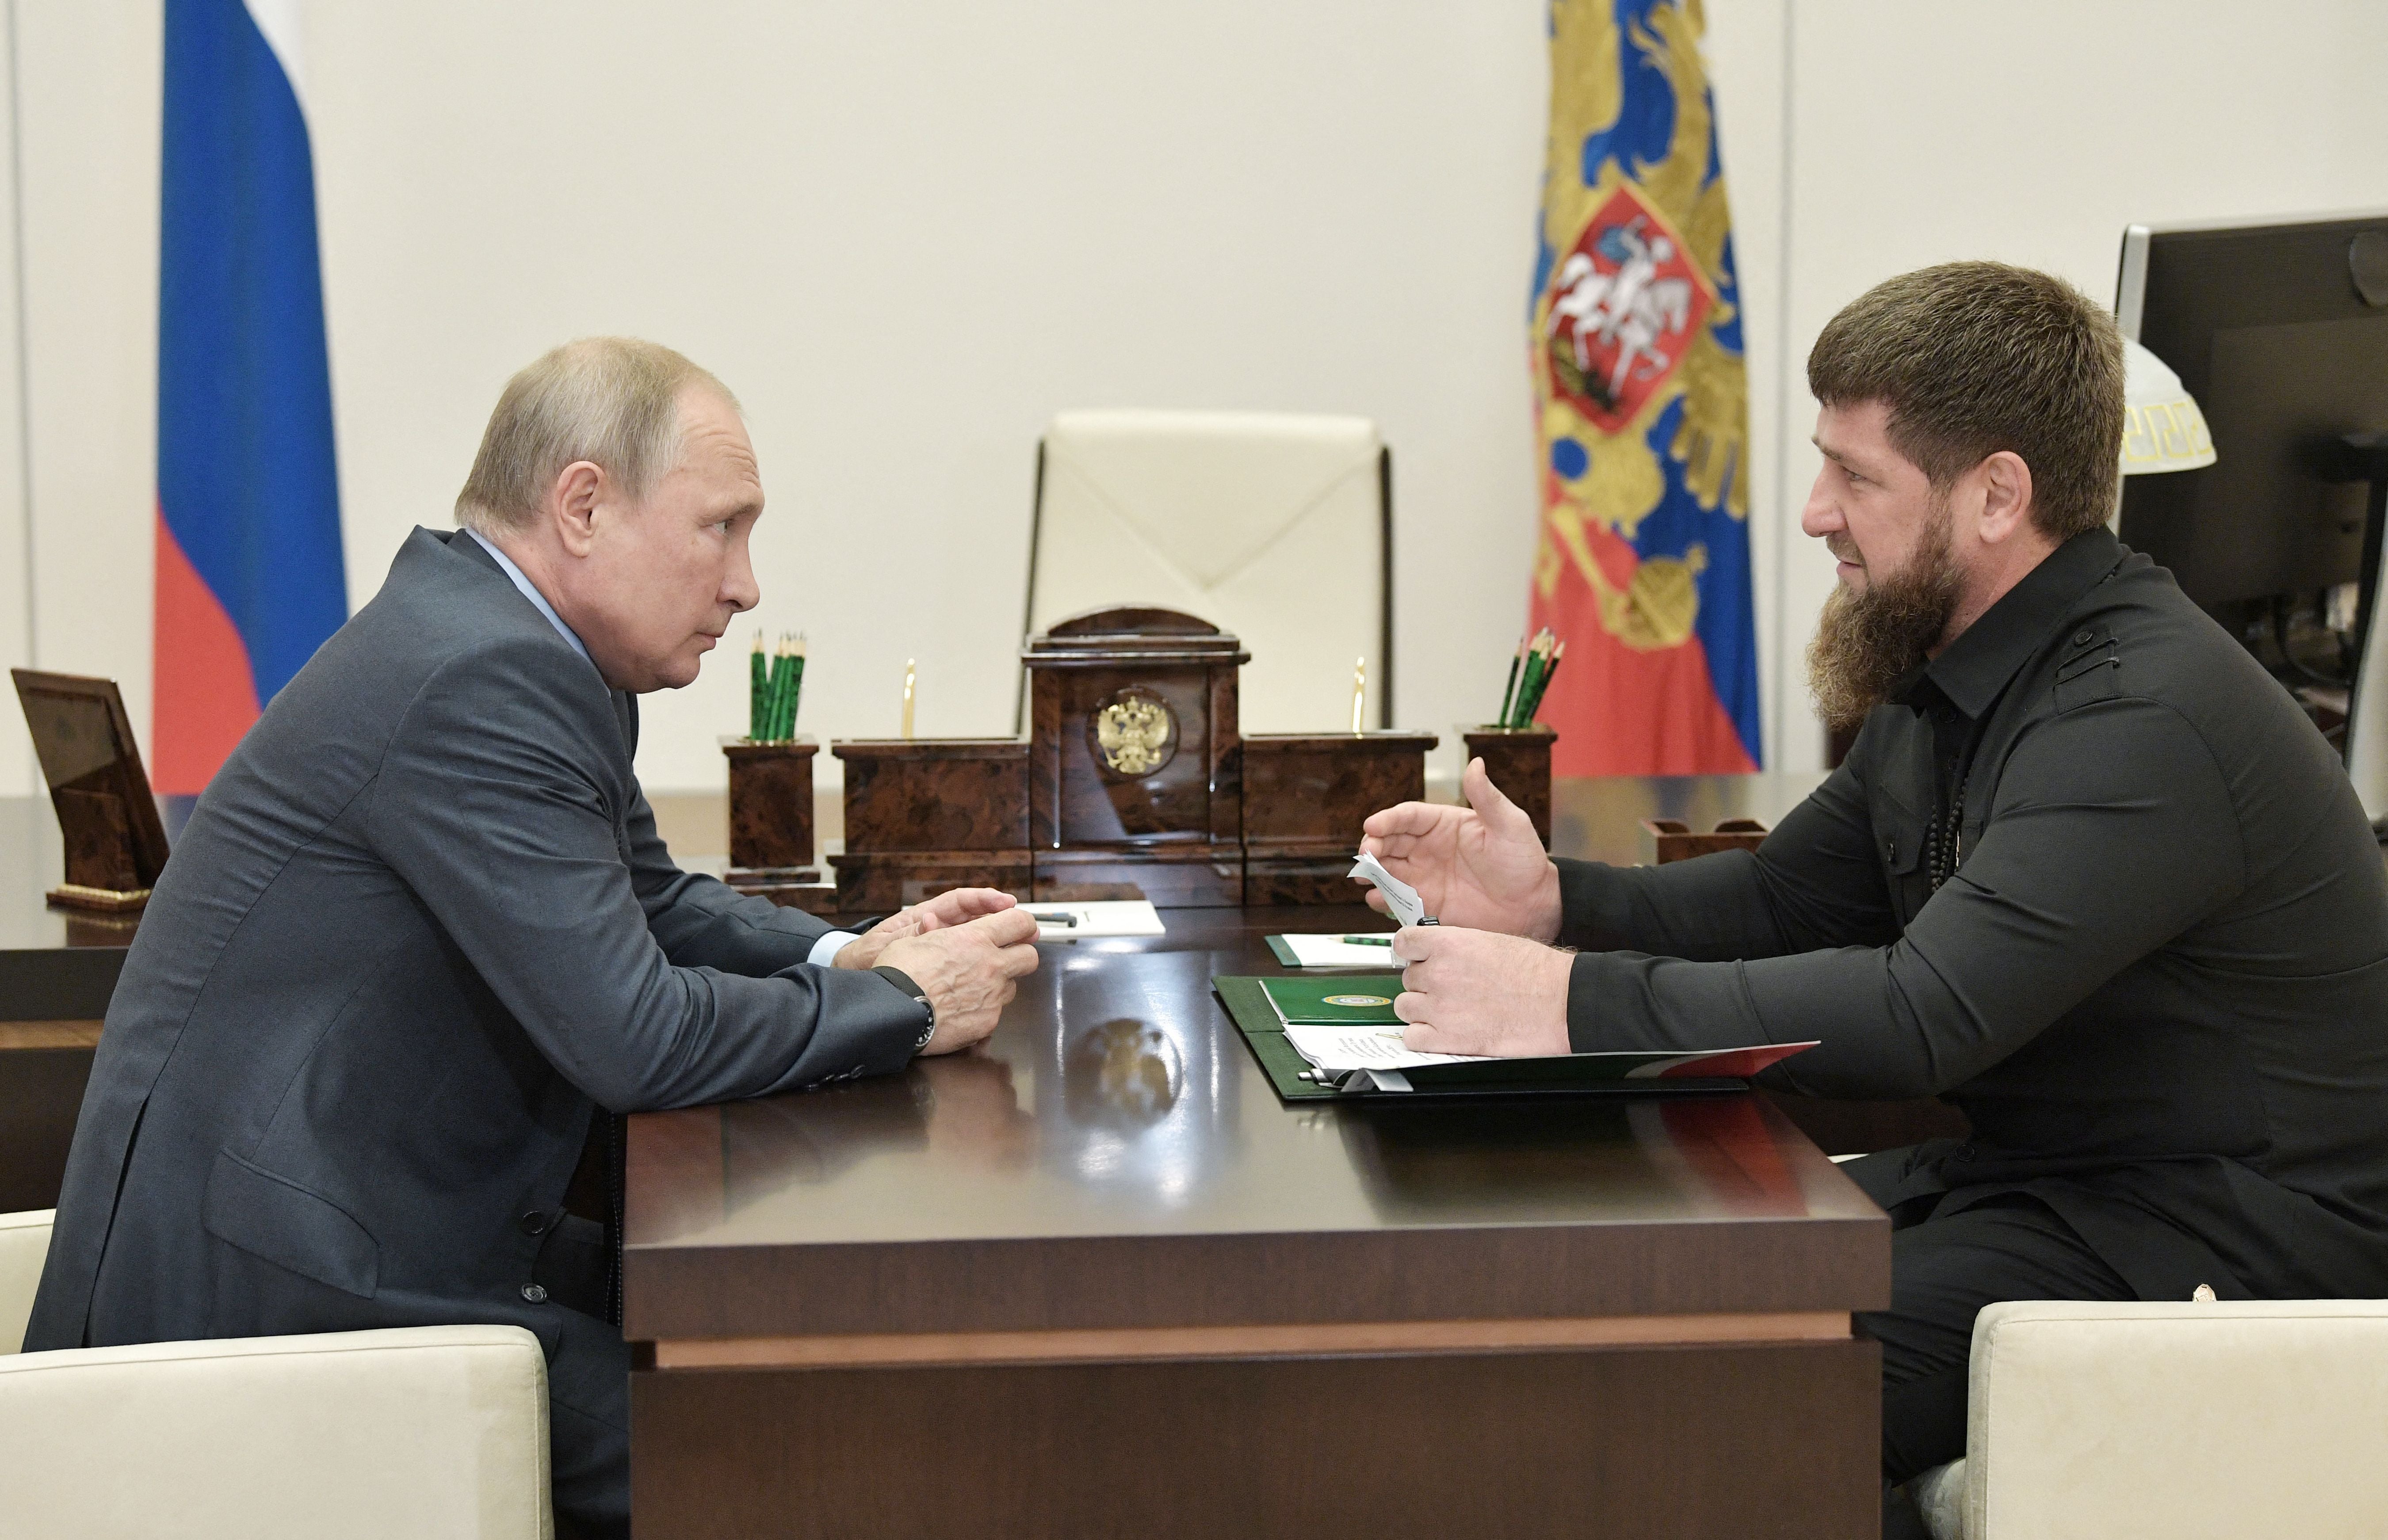 Kadyrov speaks with Vladimir Putin at the Novo-Ogaryovo state residence outside Moscow in 2019